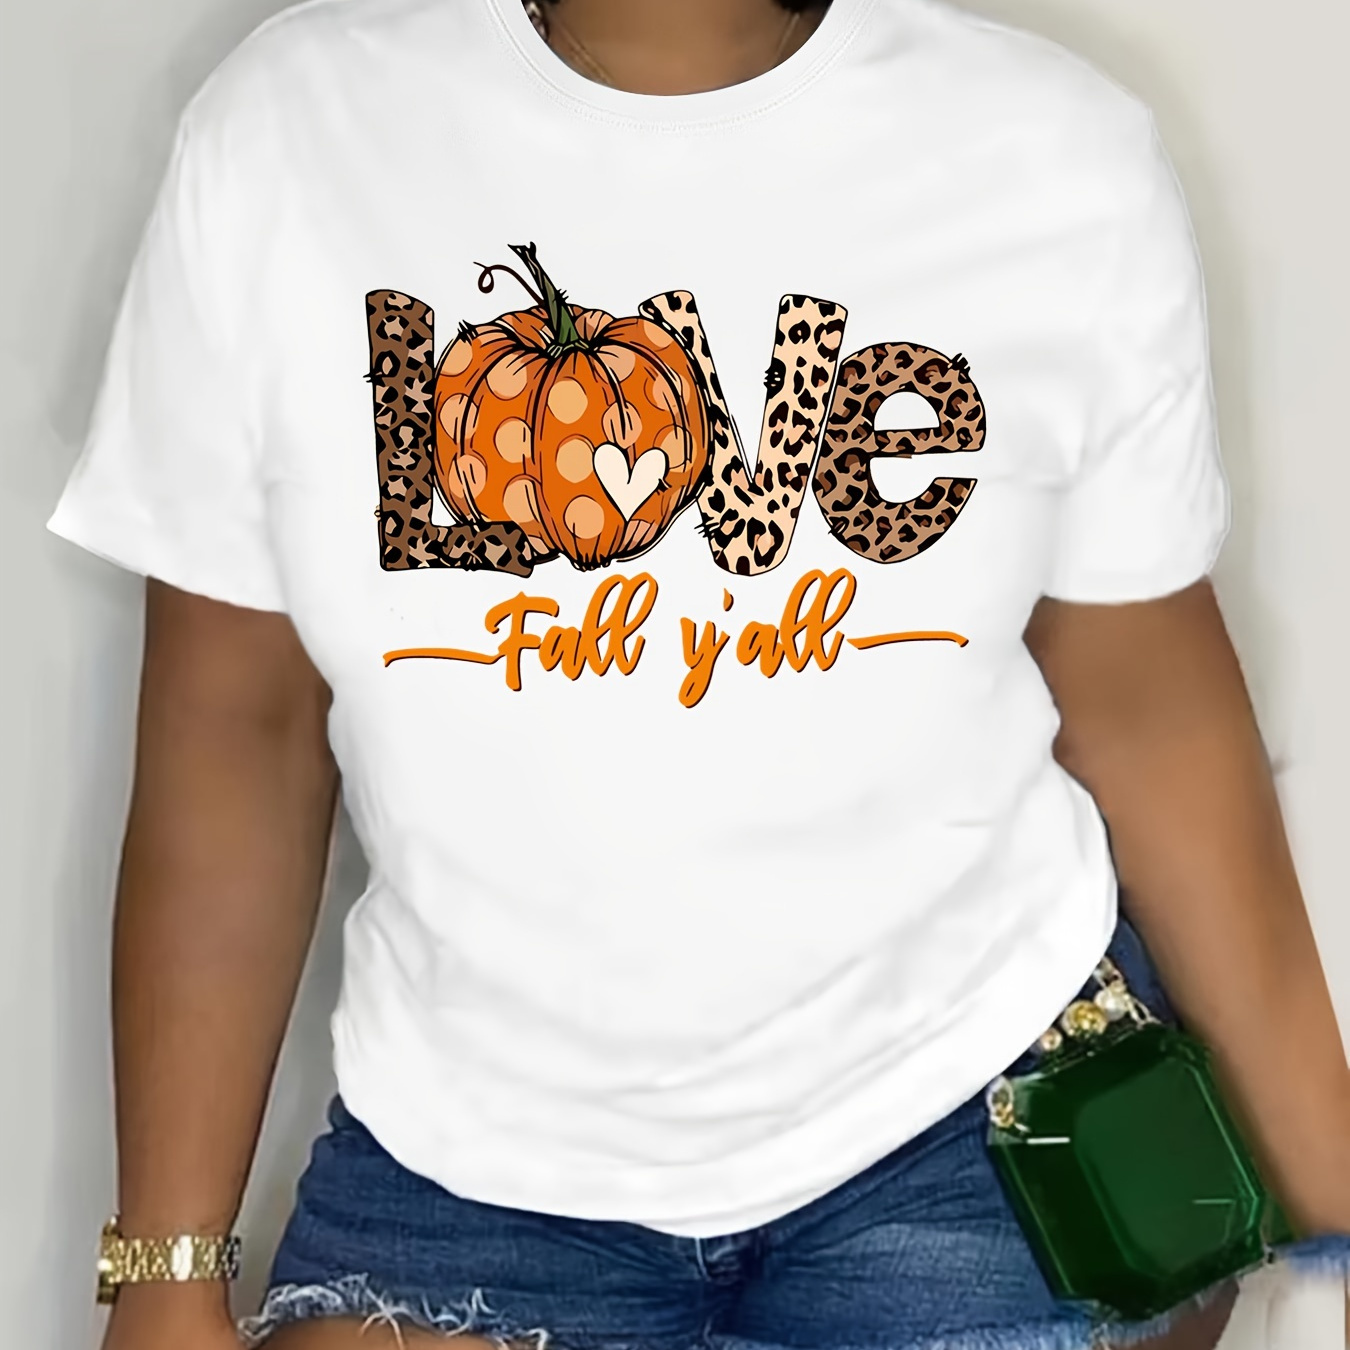 

Plus Size Pumpkin & Letter Print T-shirt, Casual Short Sleeve Top For Spring & Summer, Women's Plus Size Clothing